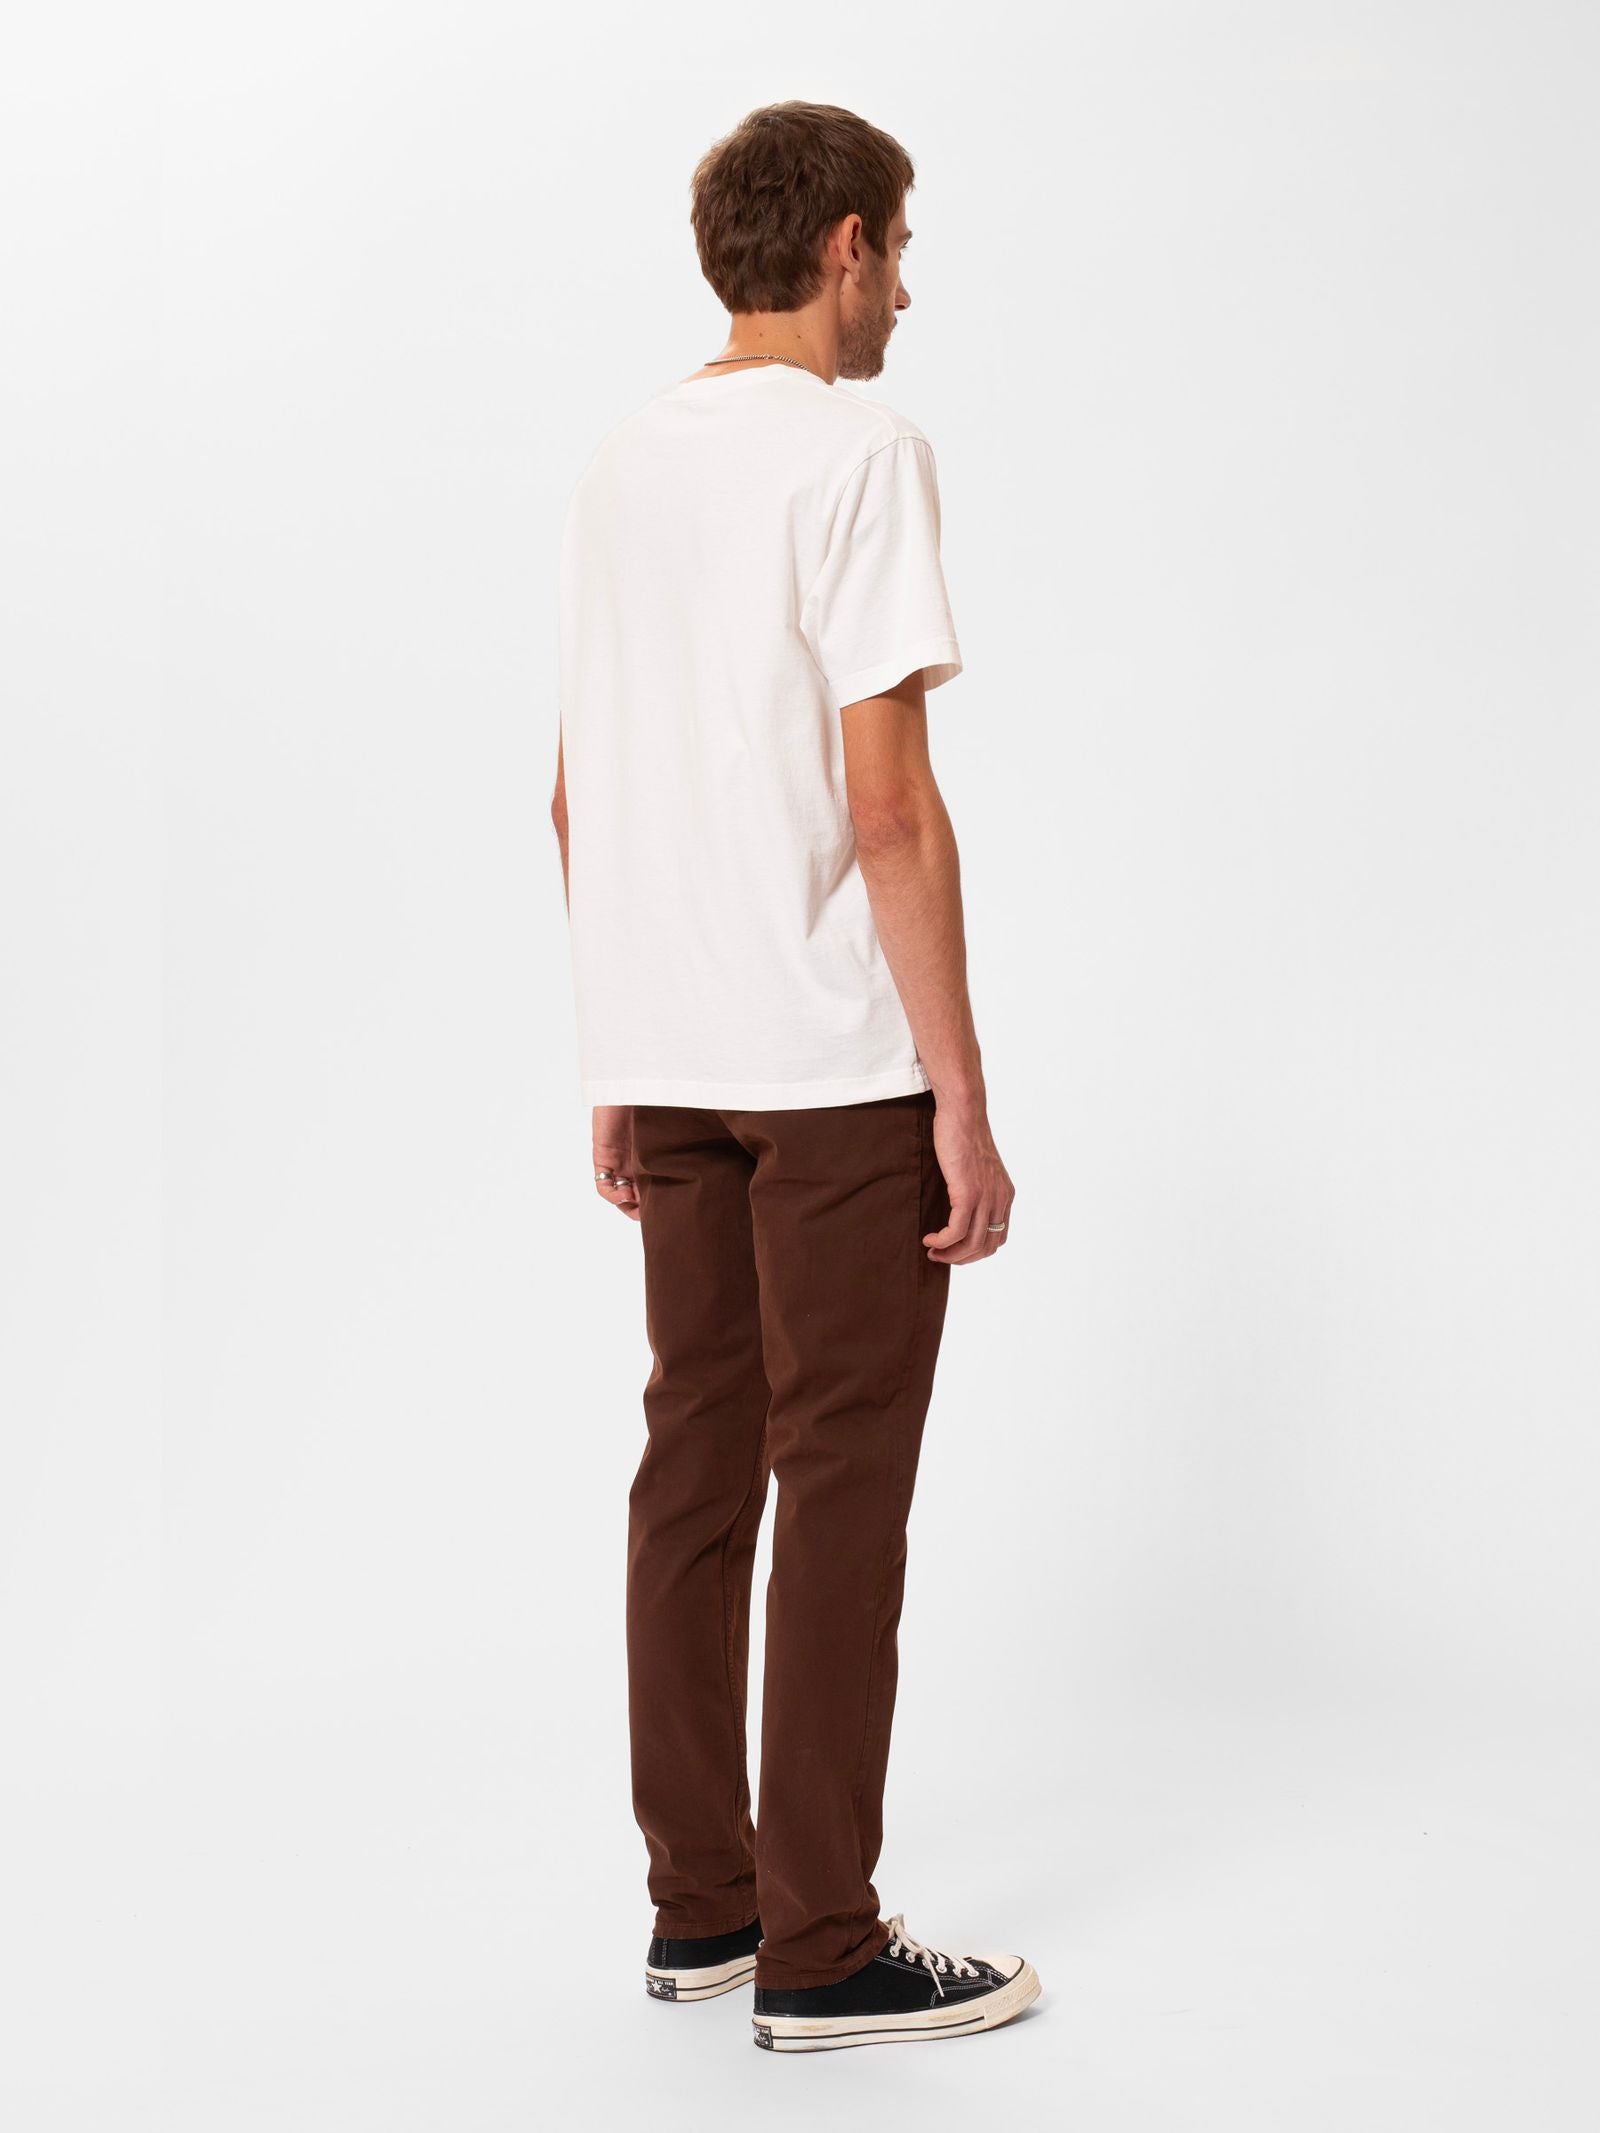 Easy Alvin Chino Pant - Washed Brown - Nudie Jeans - Danali